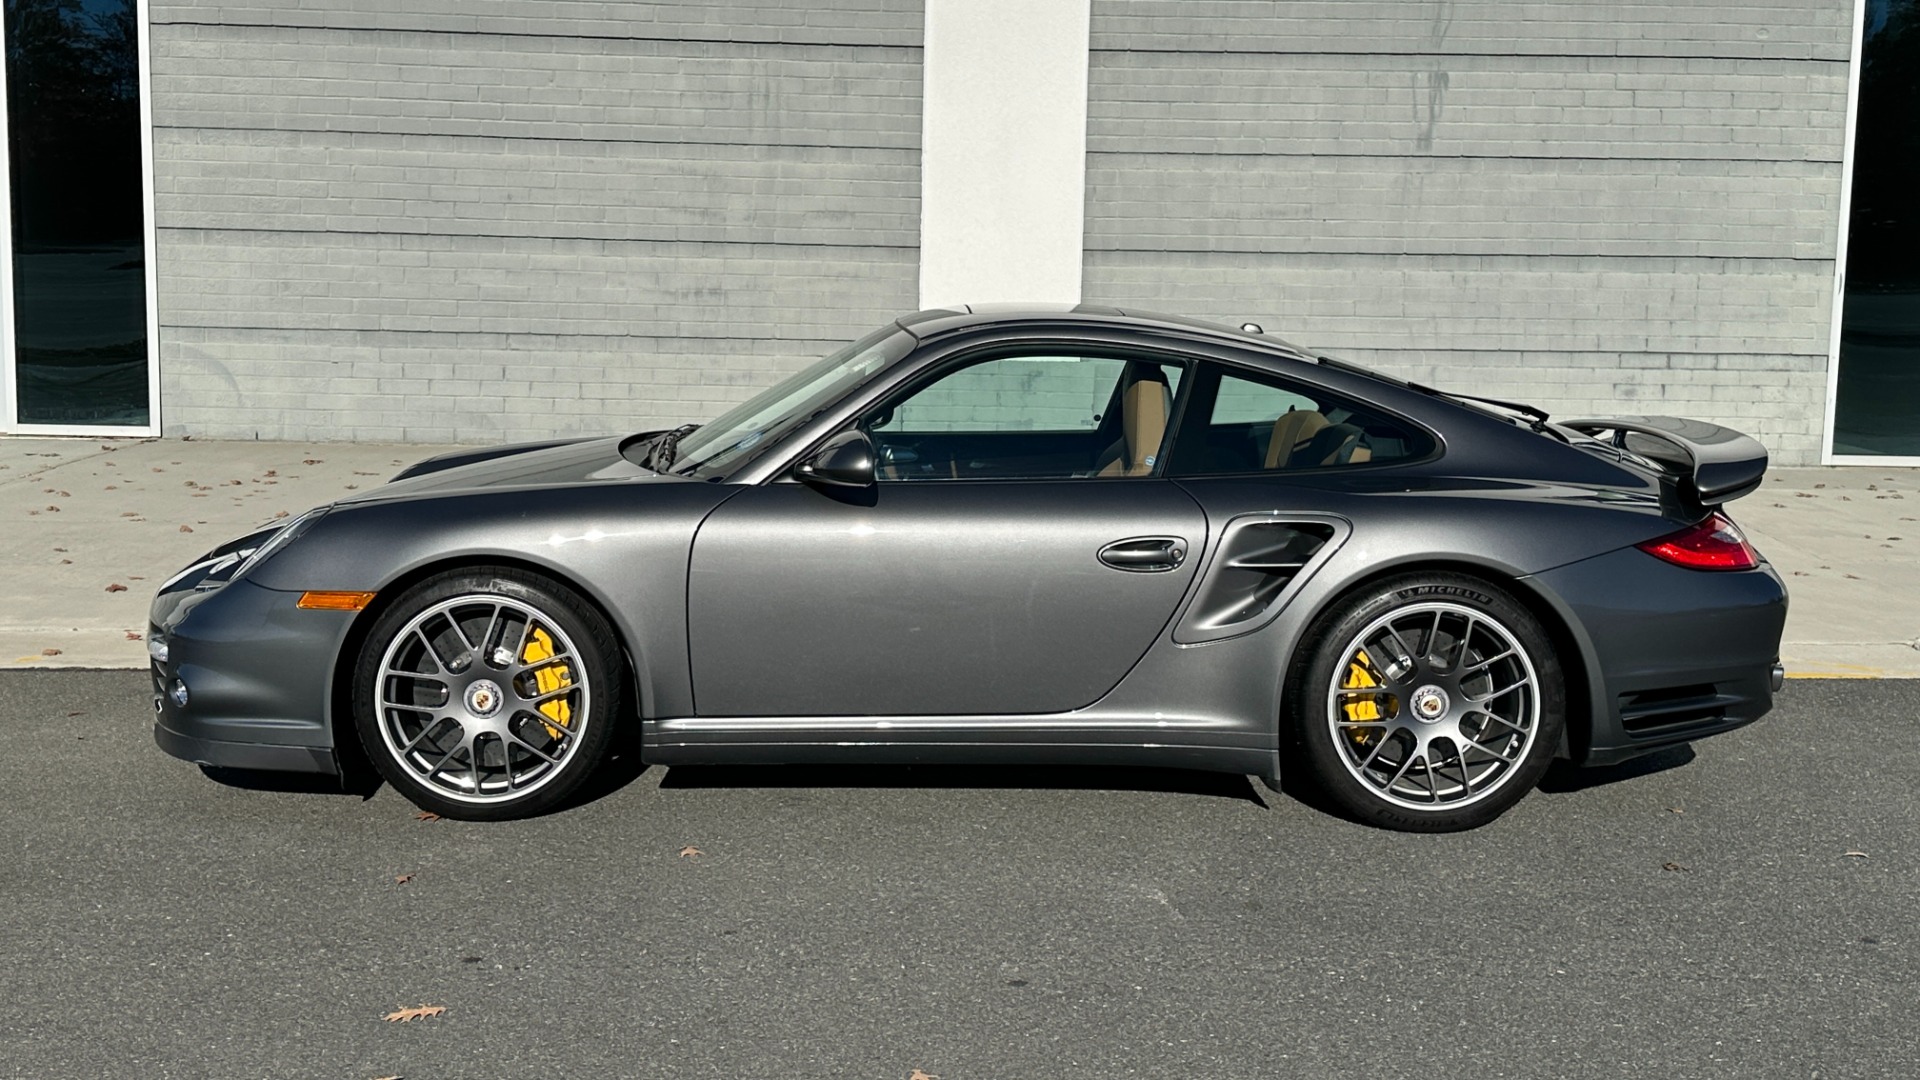 Used 2012 Porsche 911 TURBO S / CENTER LOCK WHEELS / FULL LEATHER INTERIOR / YELLOW CALIPERS / PA for sale Sold at Formula Imports in Charlotte NC 28227 3